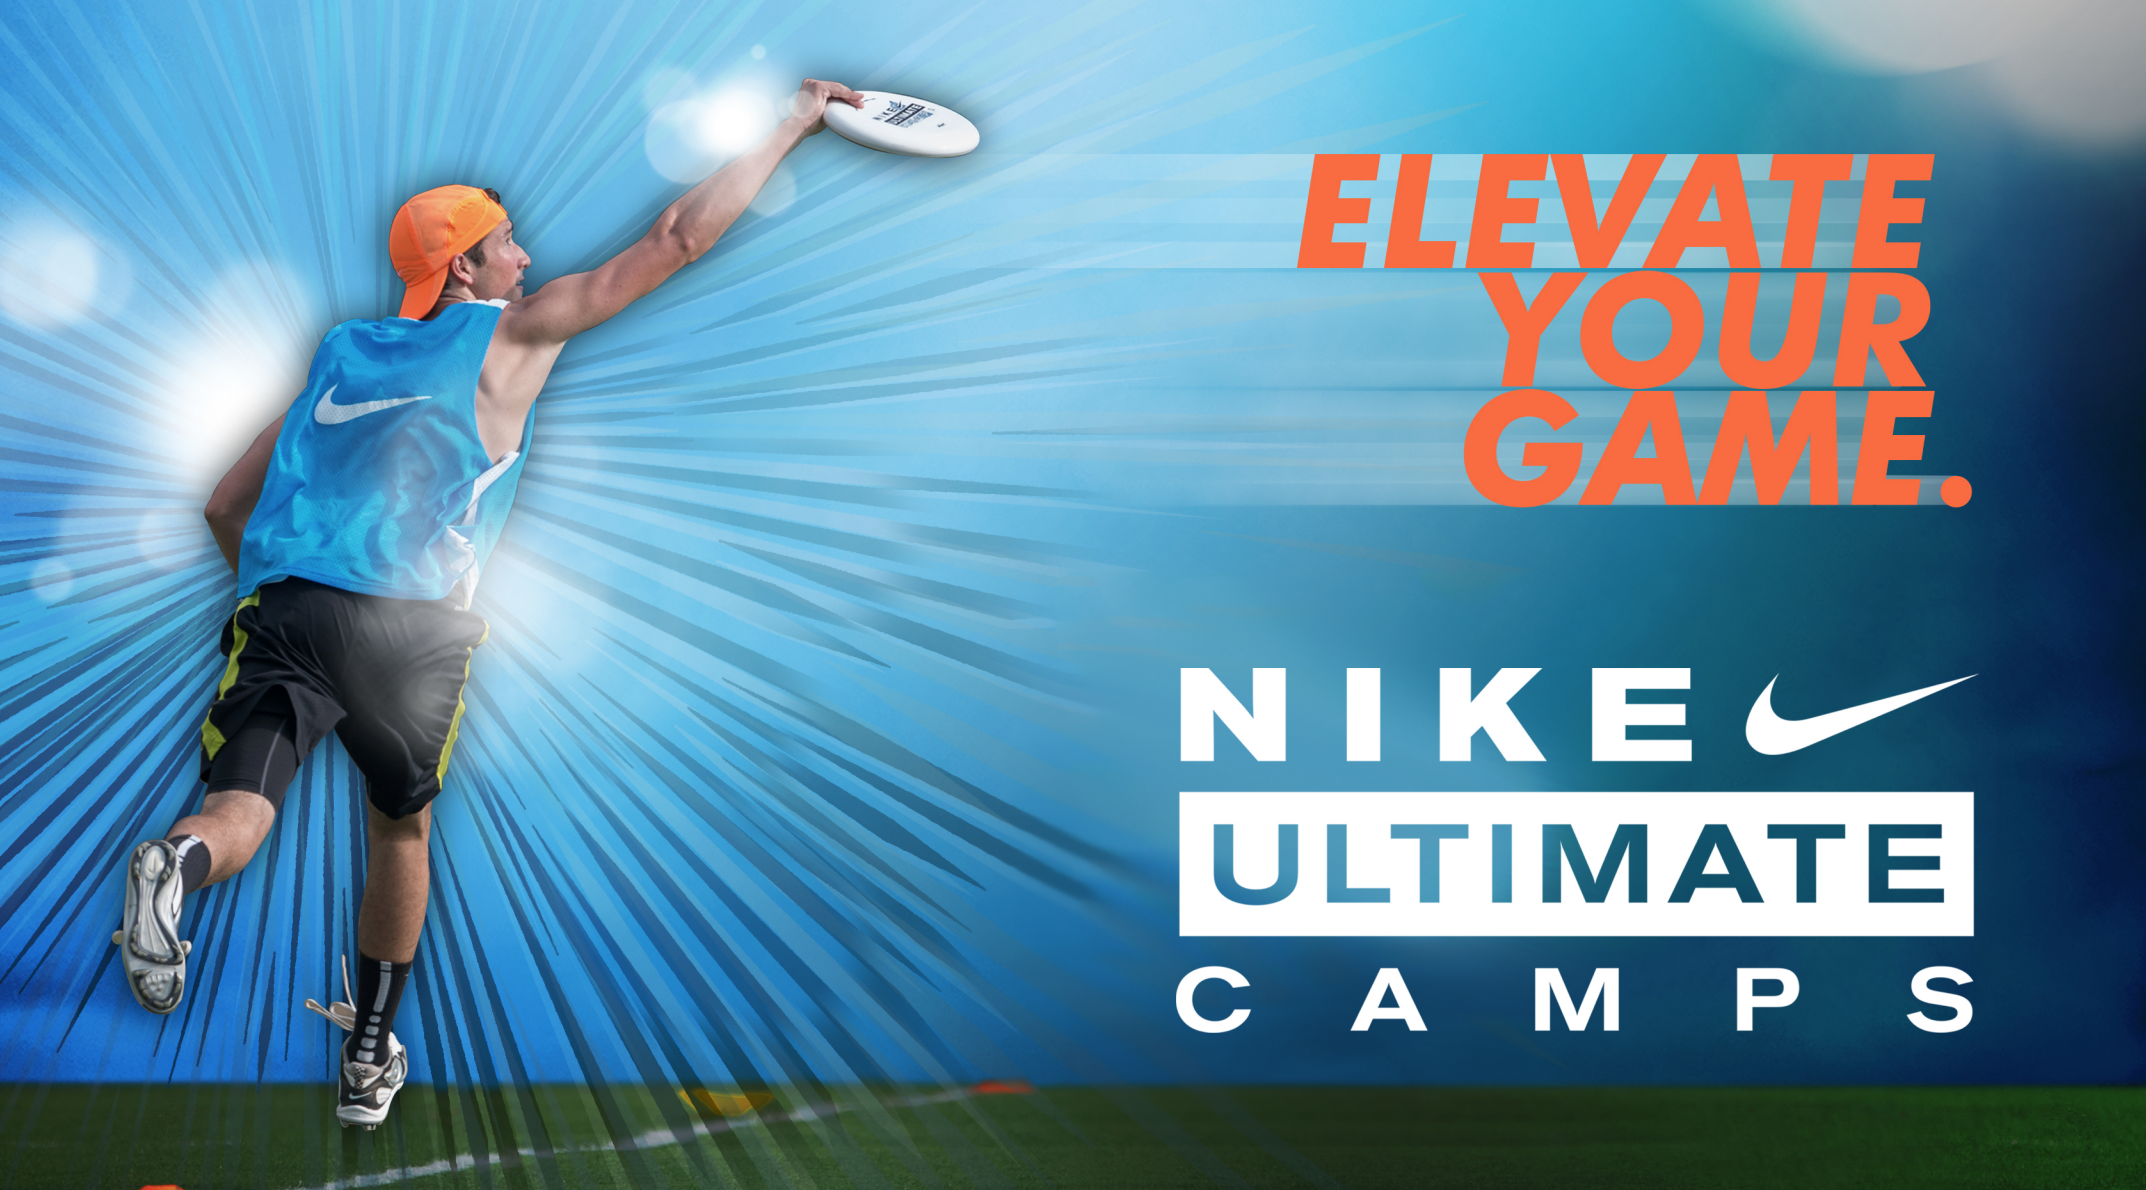 Nike Ultimate Camps